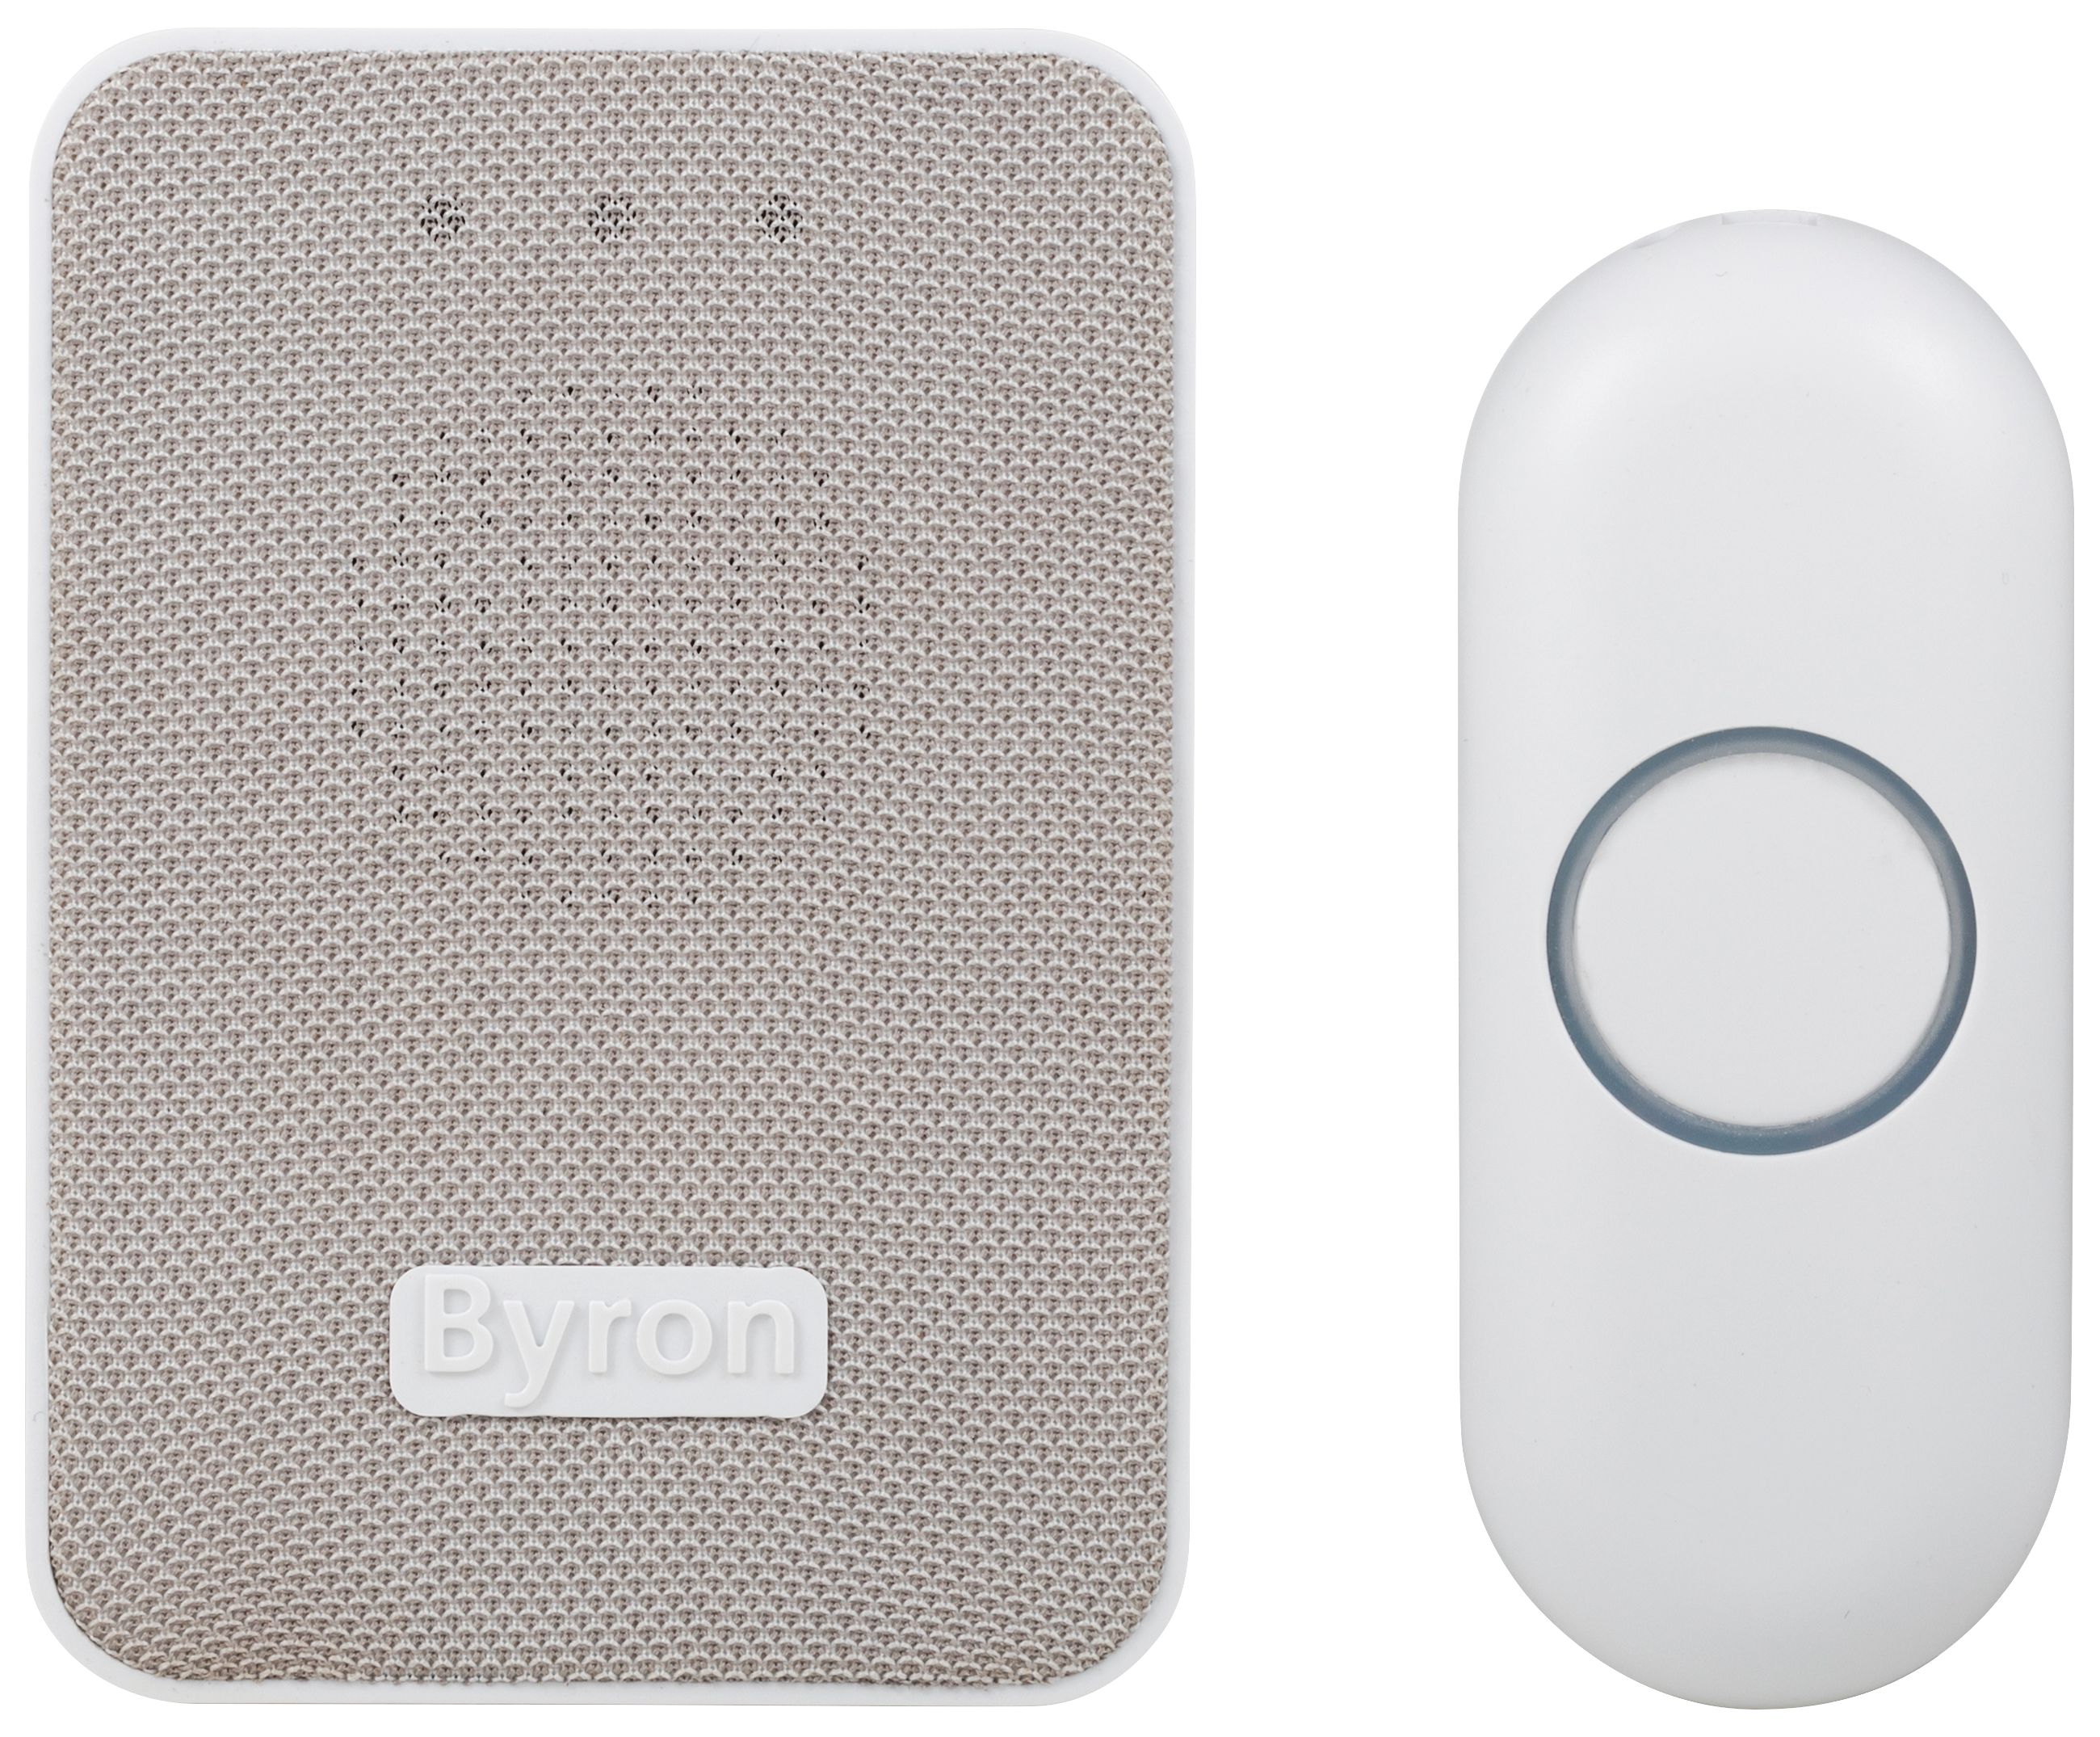 Image of Byron DBY-22322UK 150m Wireless Doorbell with Plug In Chime